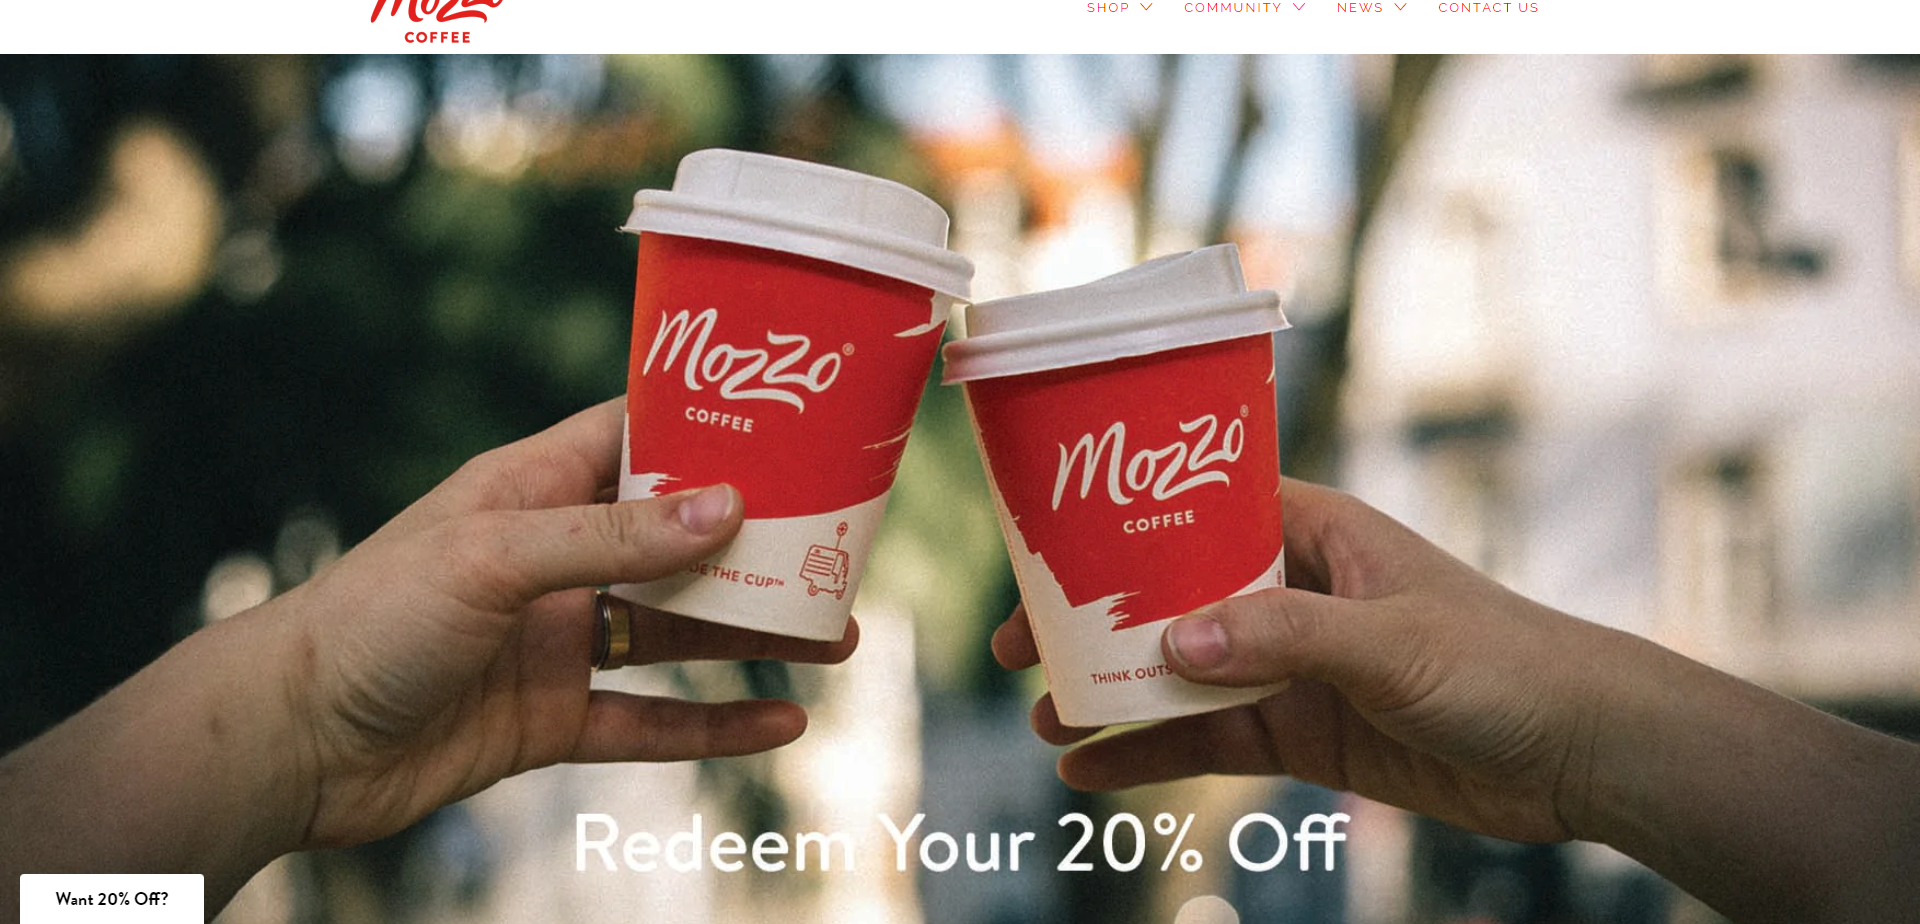 Landing Page for Mozzo Coffee